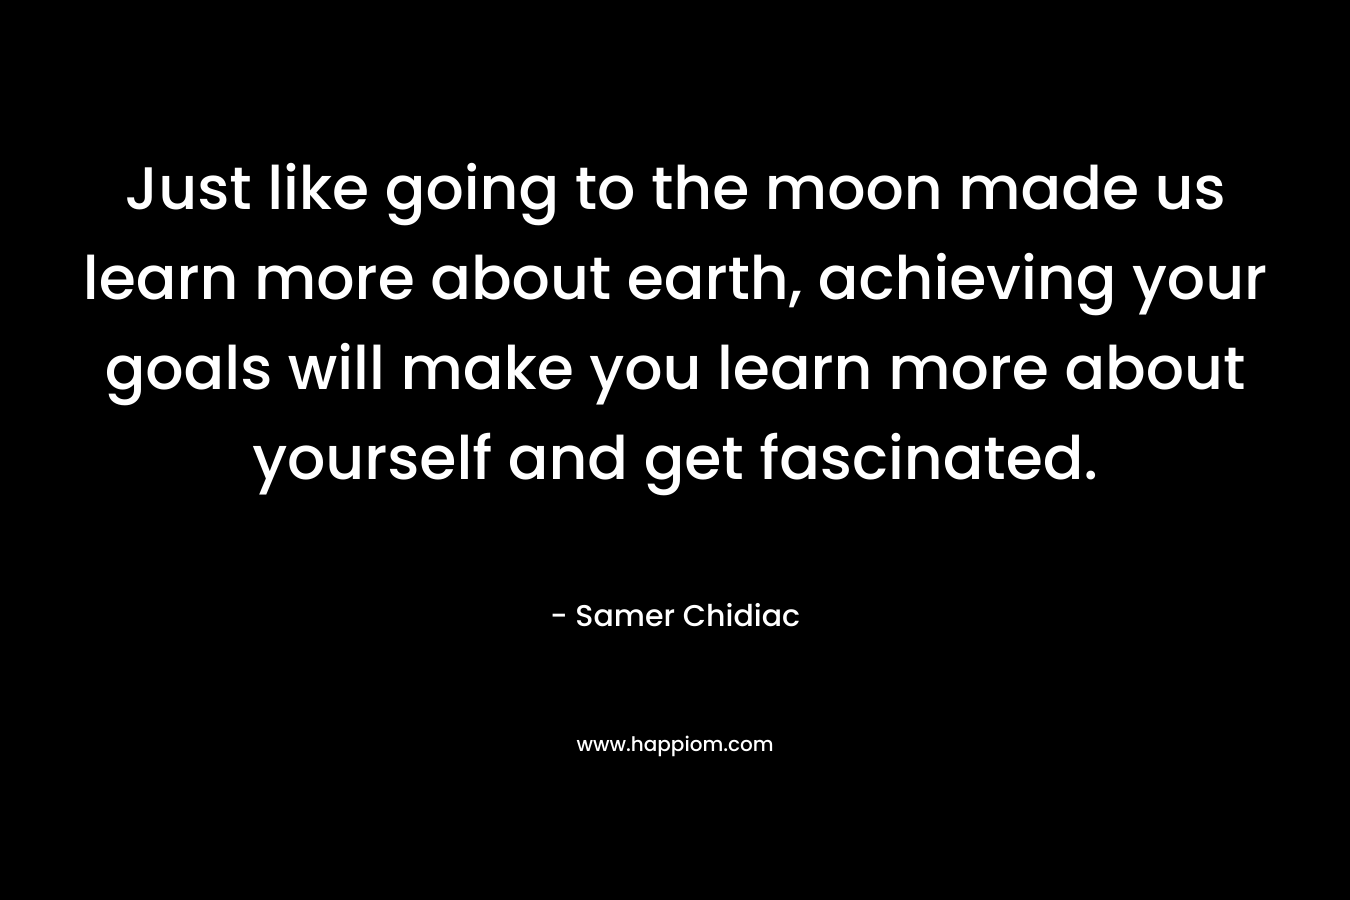 Just like going to the moon made us learn more about earth, achieving your goals will make you learn more about yourself and get fascinated.